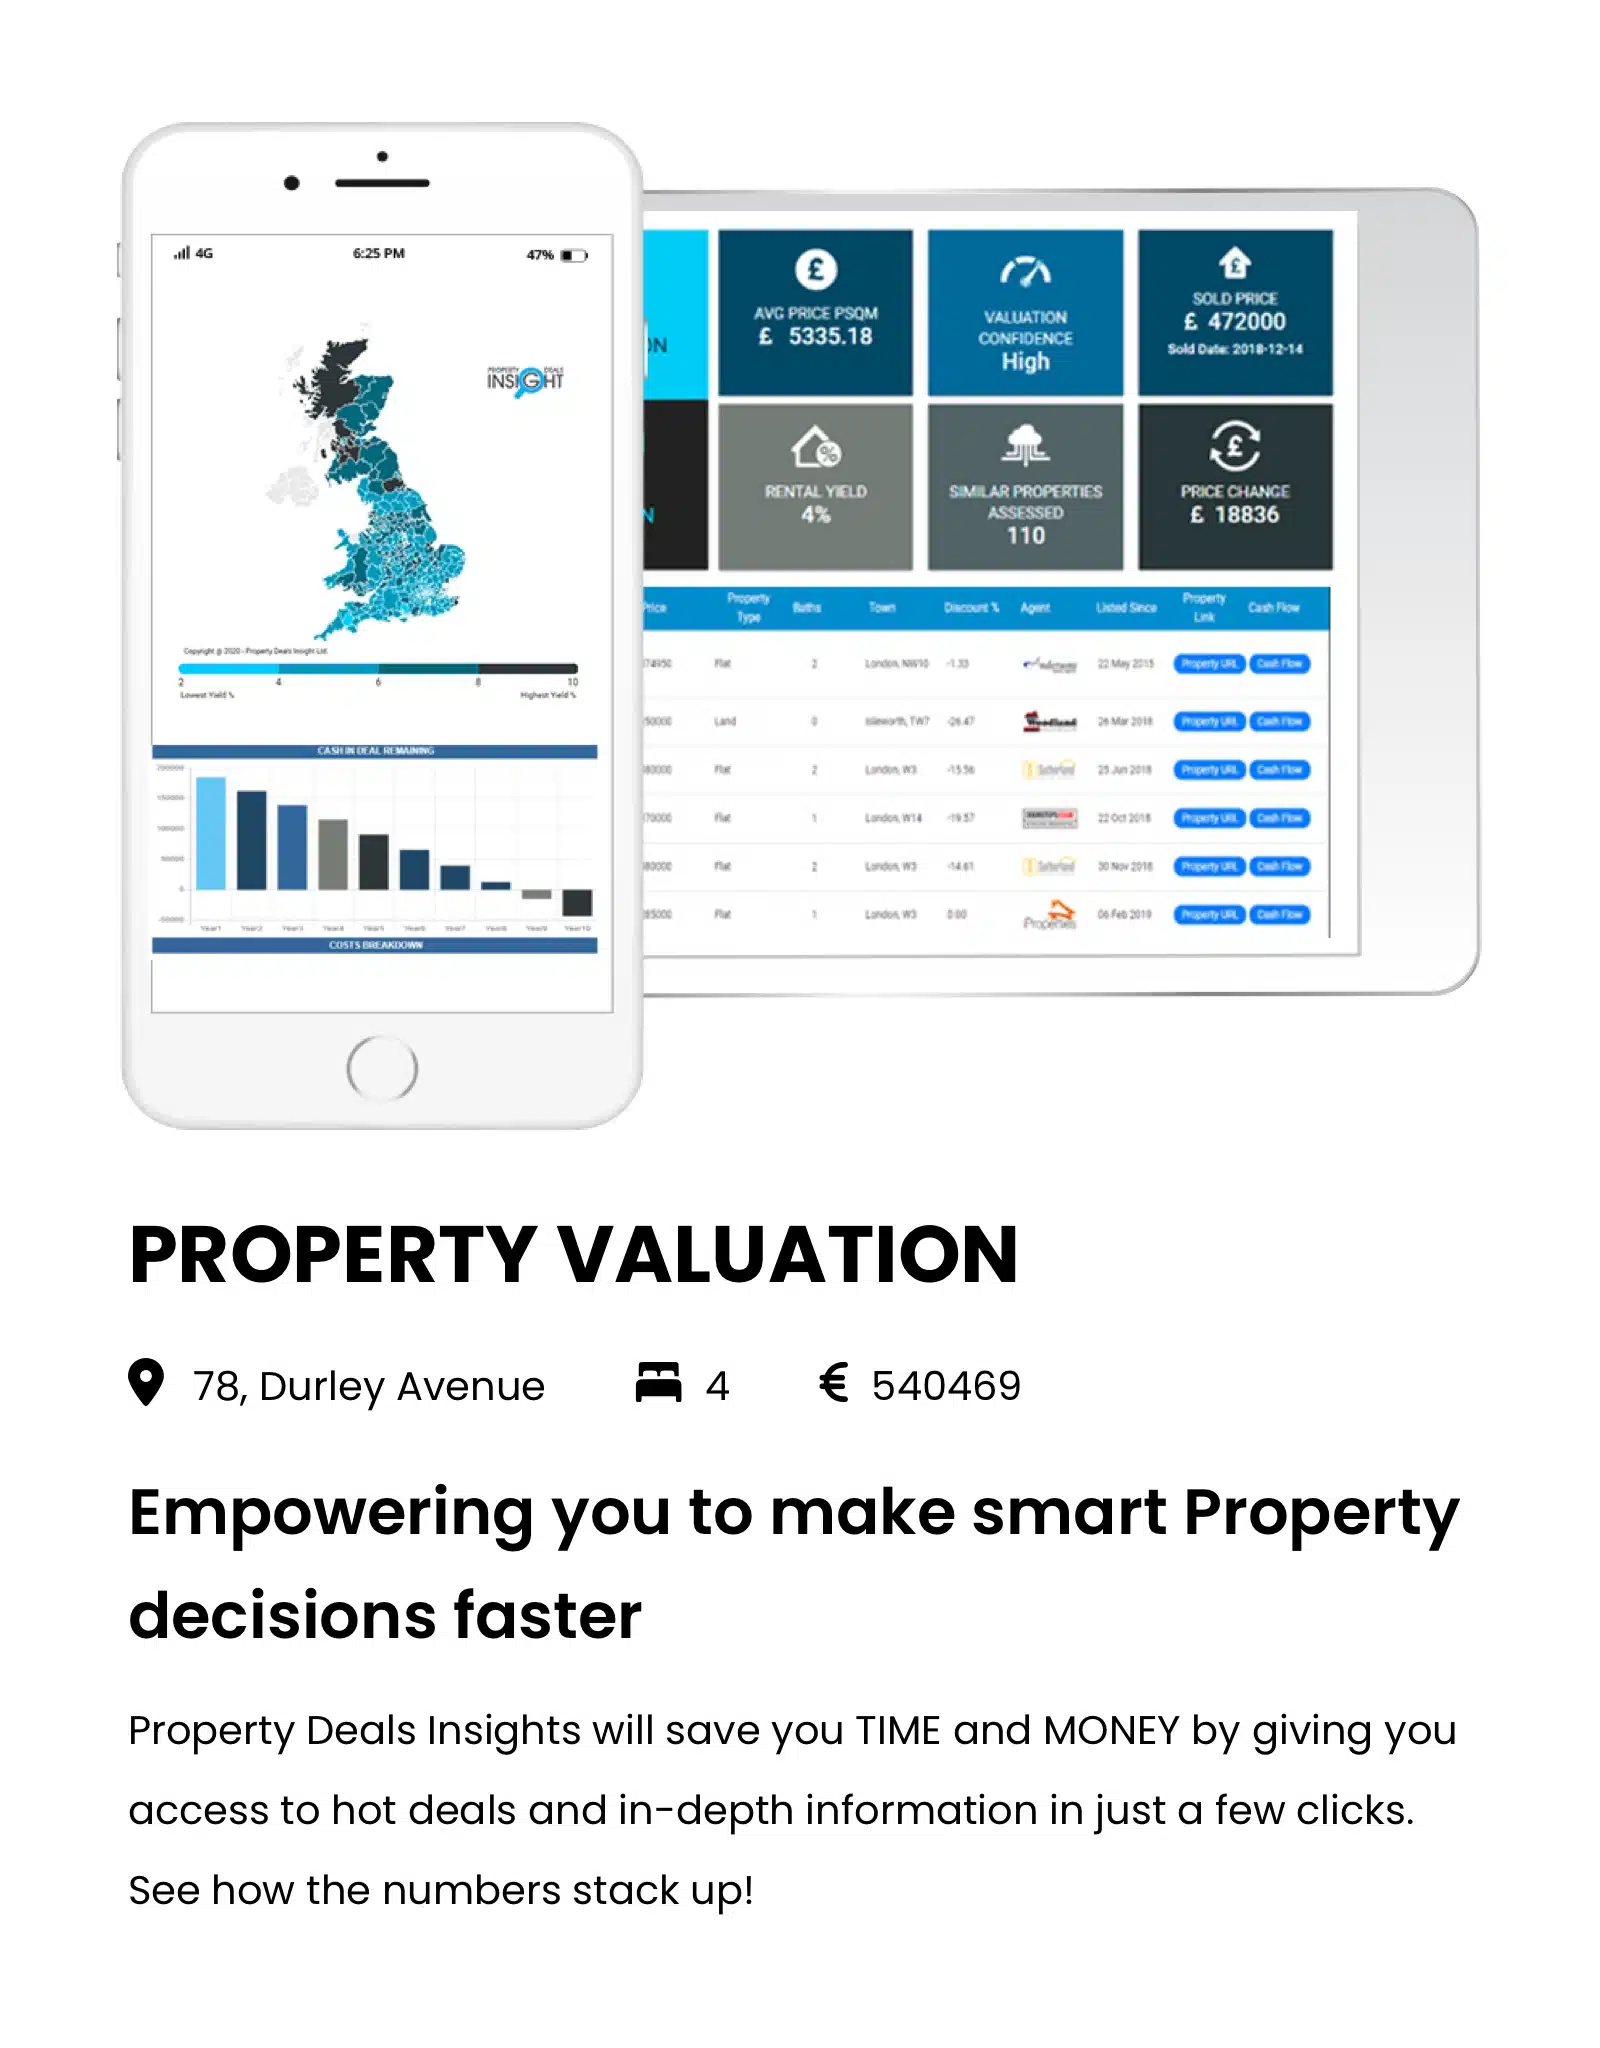 Property Valuation Reports - Instantly evaluate any property throughout UK